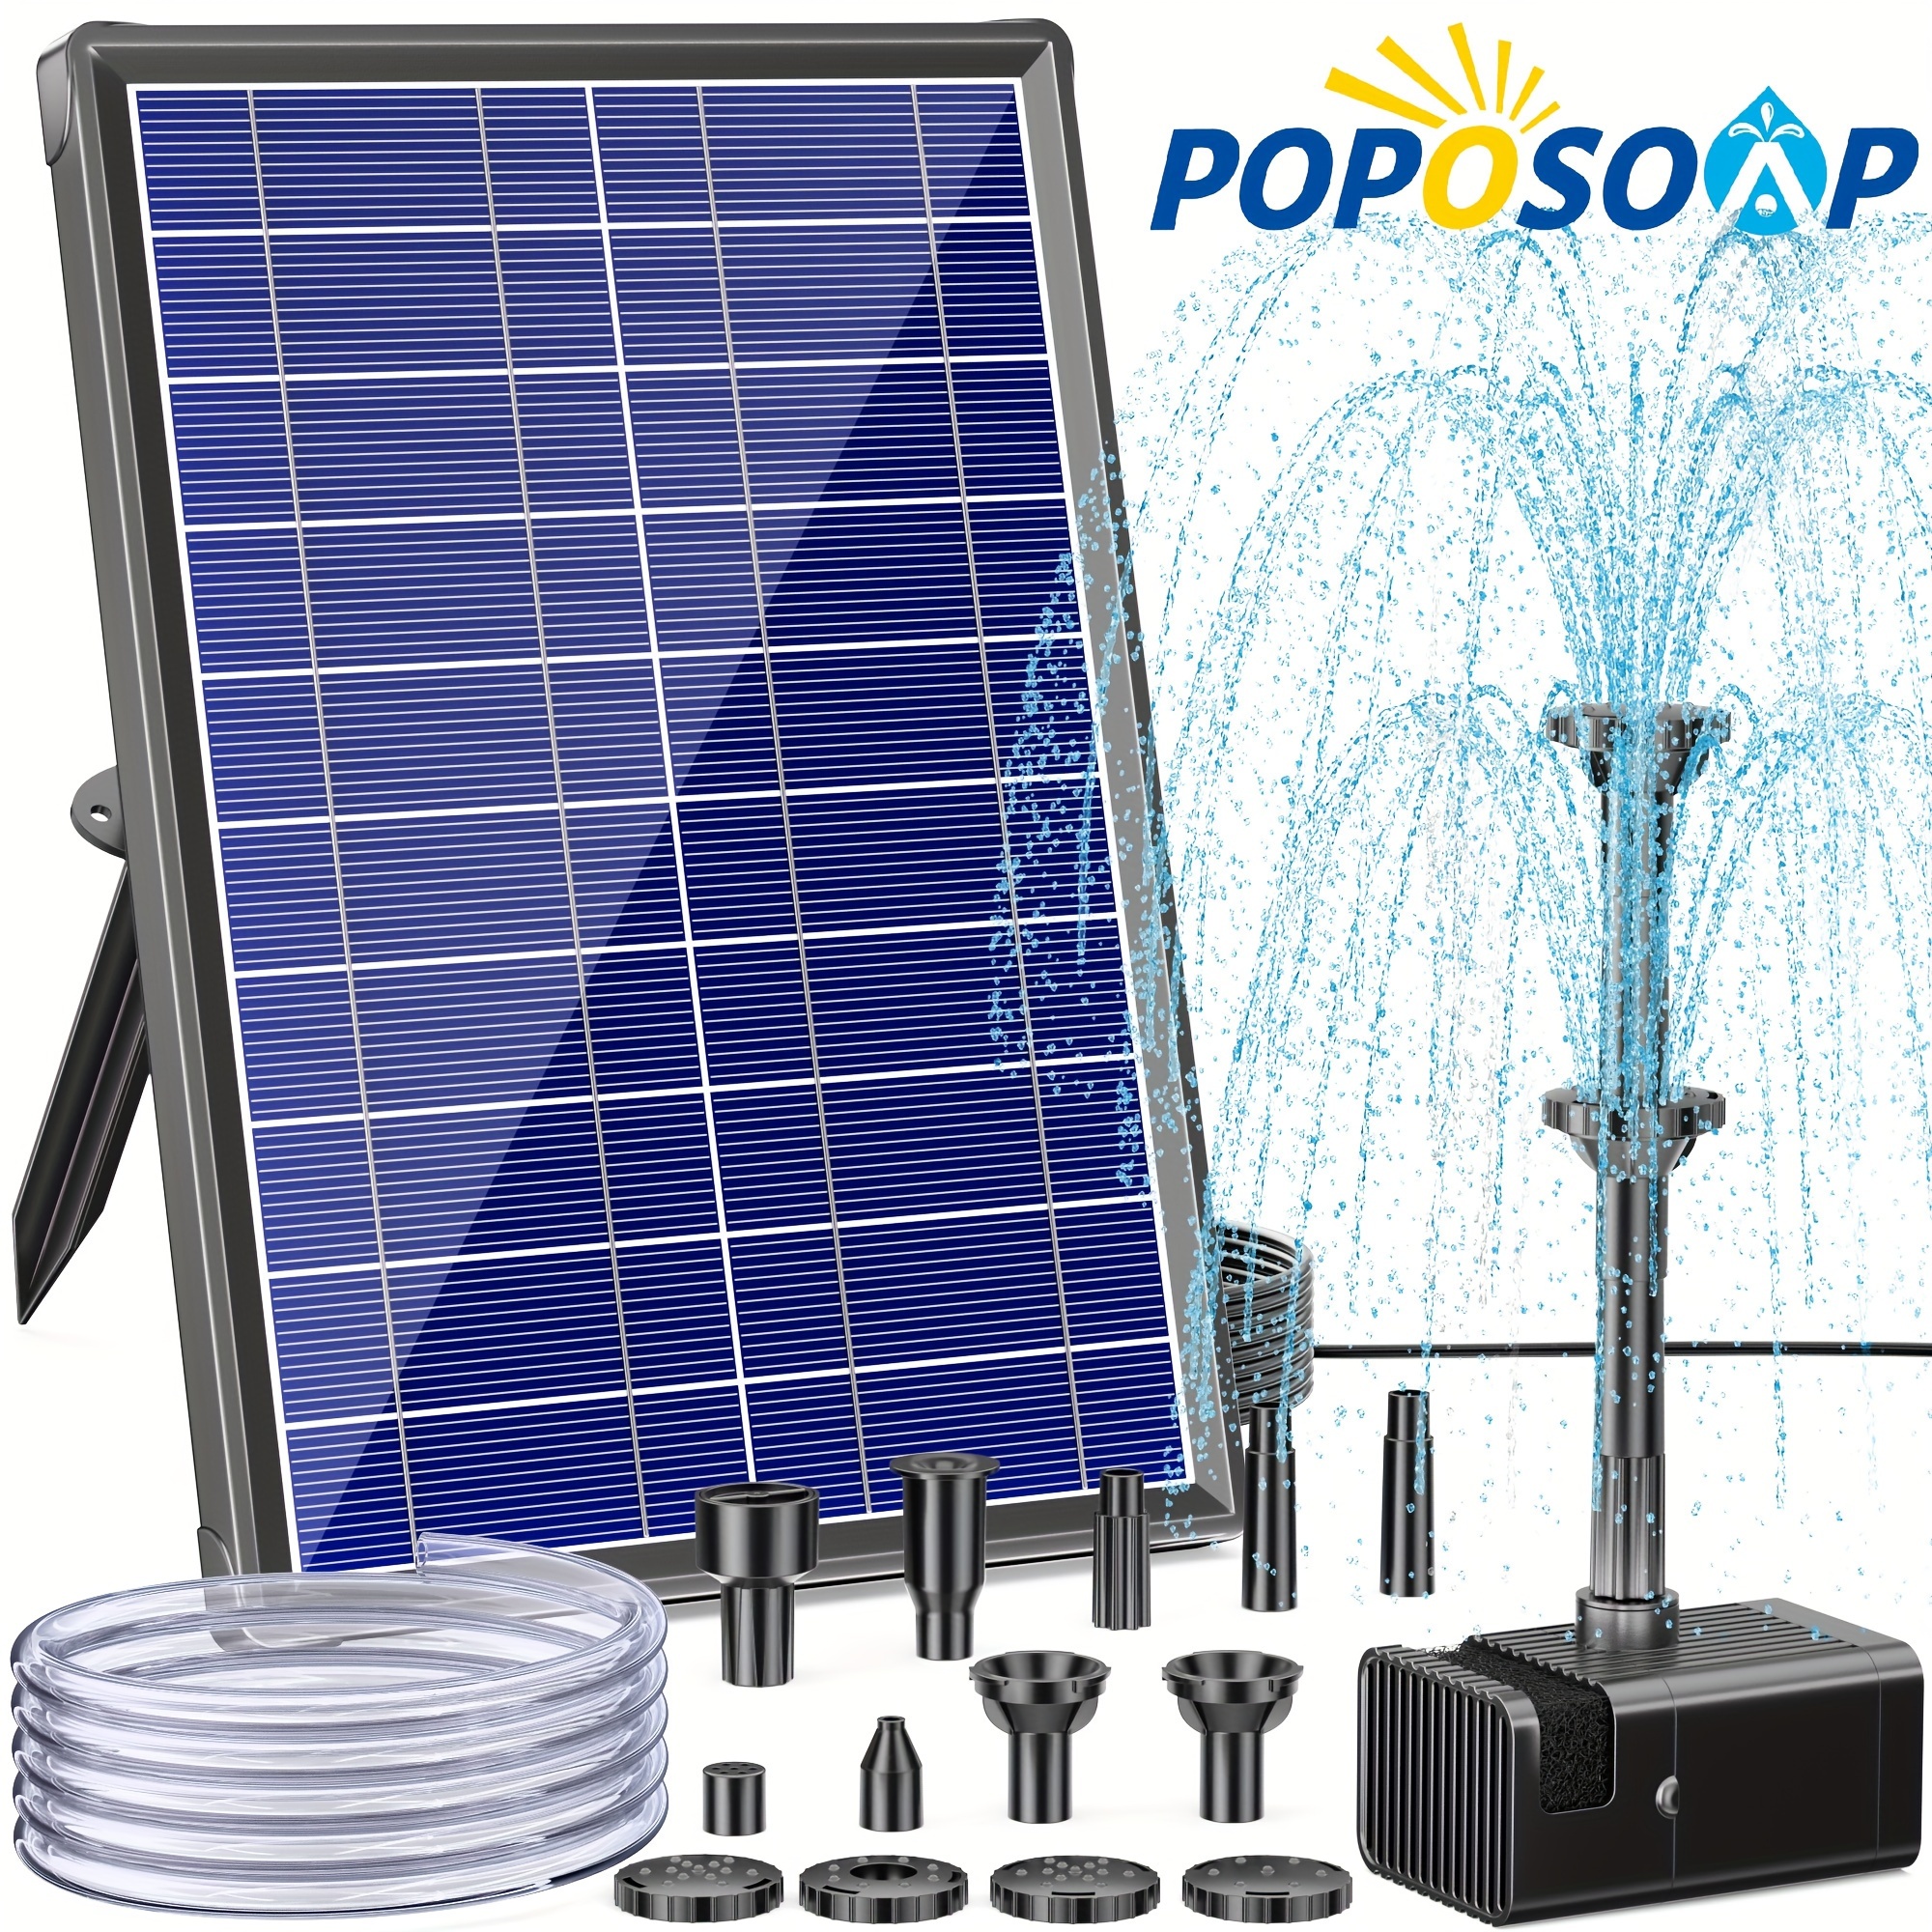 

Solar Fountain For Bird Bath, 8w Solar Water Fountain Pump With Dry-run Protection & Double-layer Nozzles, Solar Powered Fountain With 5ft Tubing For , Bird Bath, Water Feature